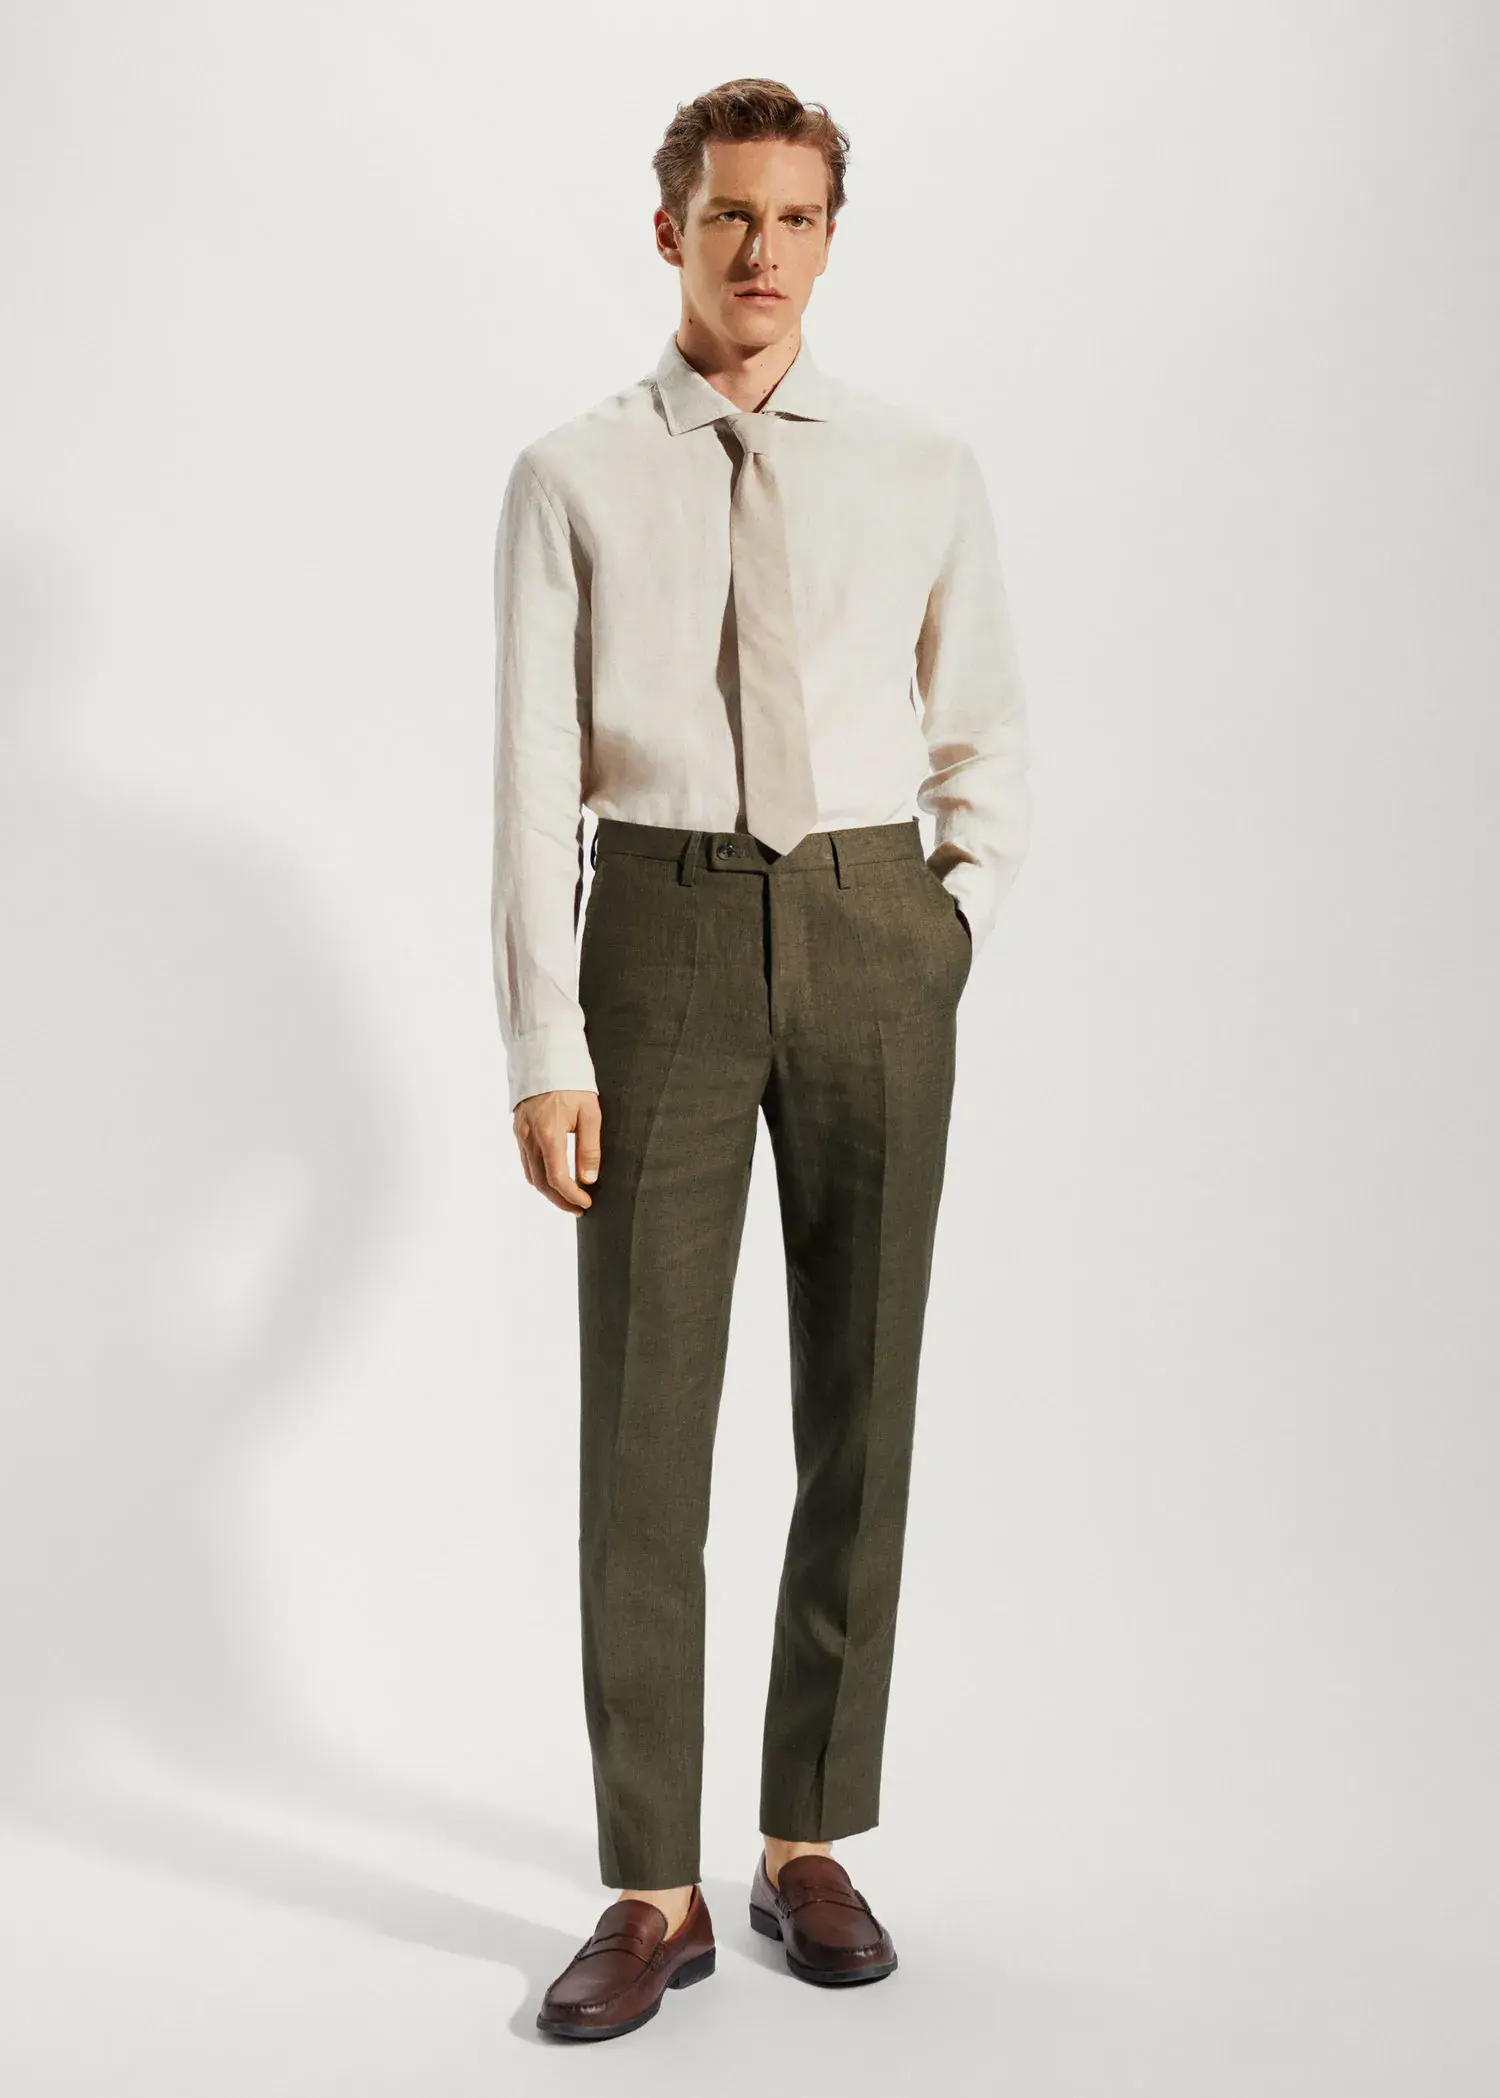 Mango 100% linen suit trousers. a man in a suit and tie standing in front of a white wall. 